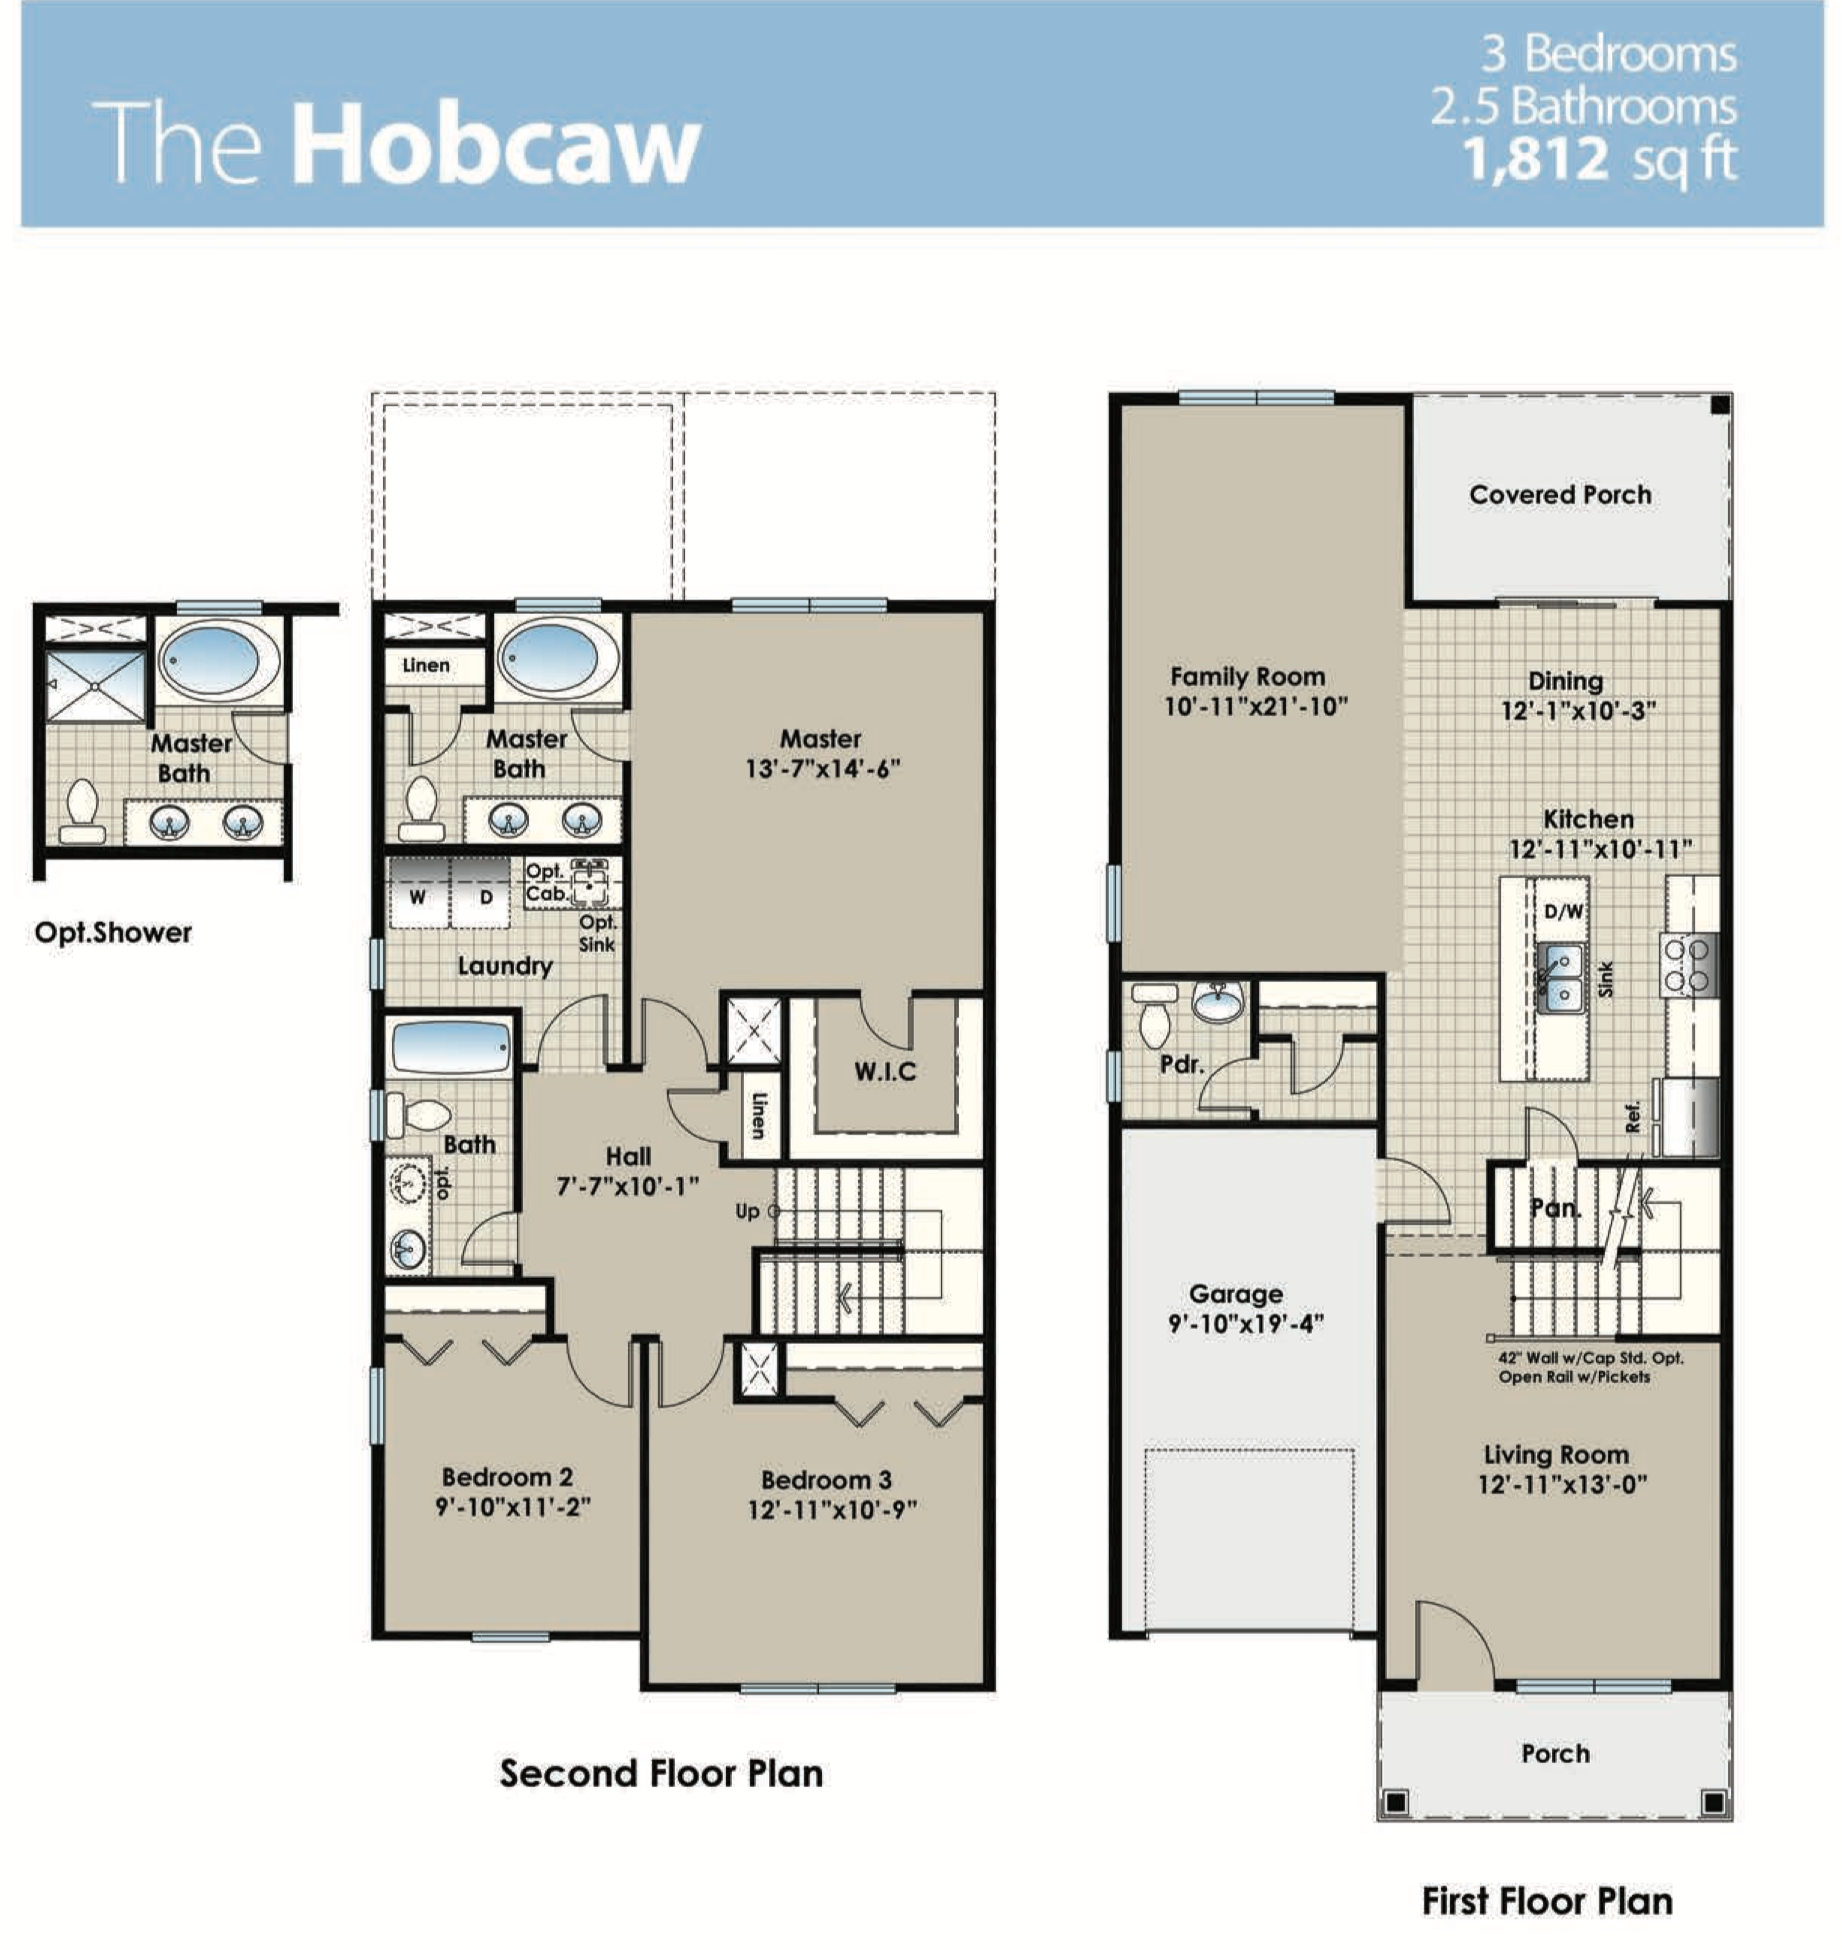 The Hobcaw floor plan image